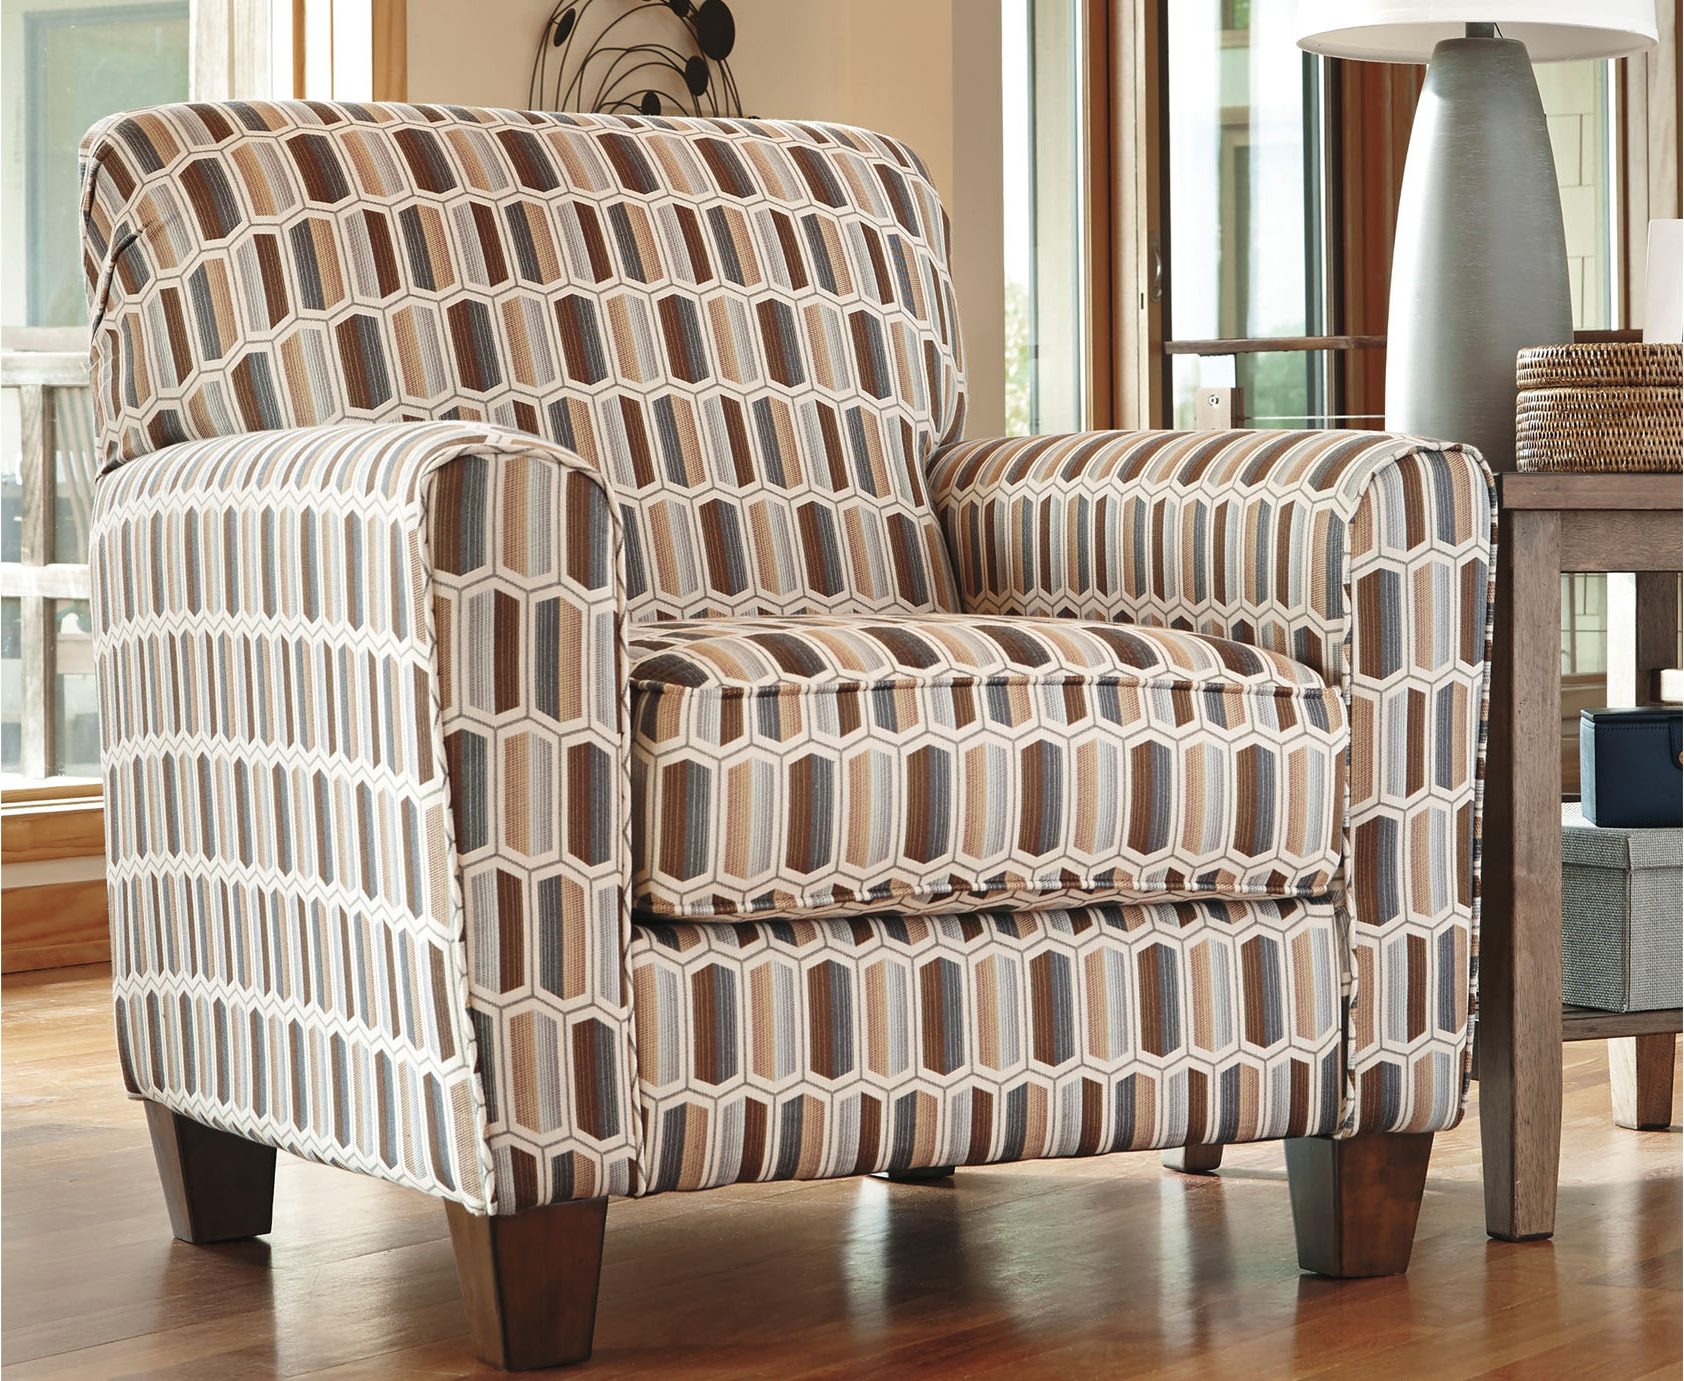 Fabric Chair Styles • New Image Furniture Leasing